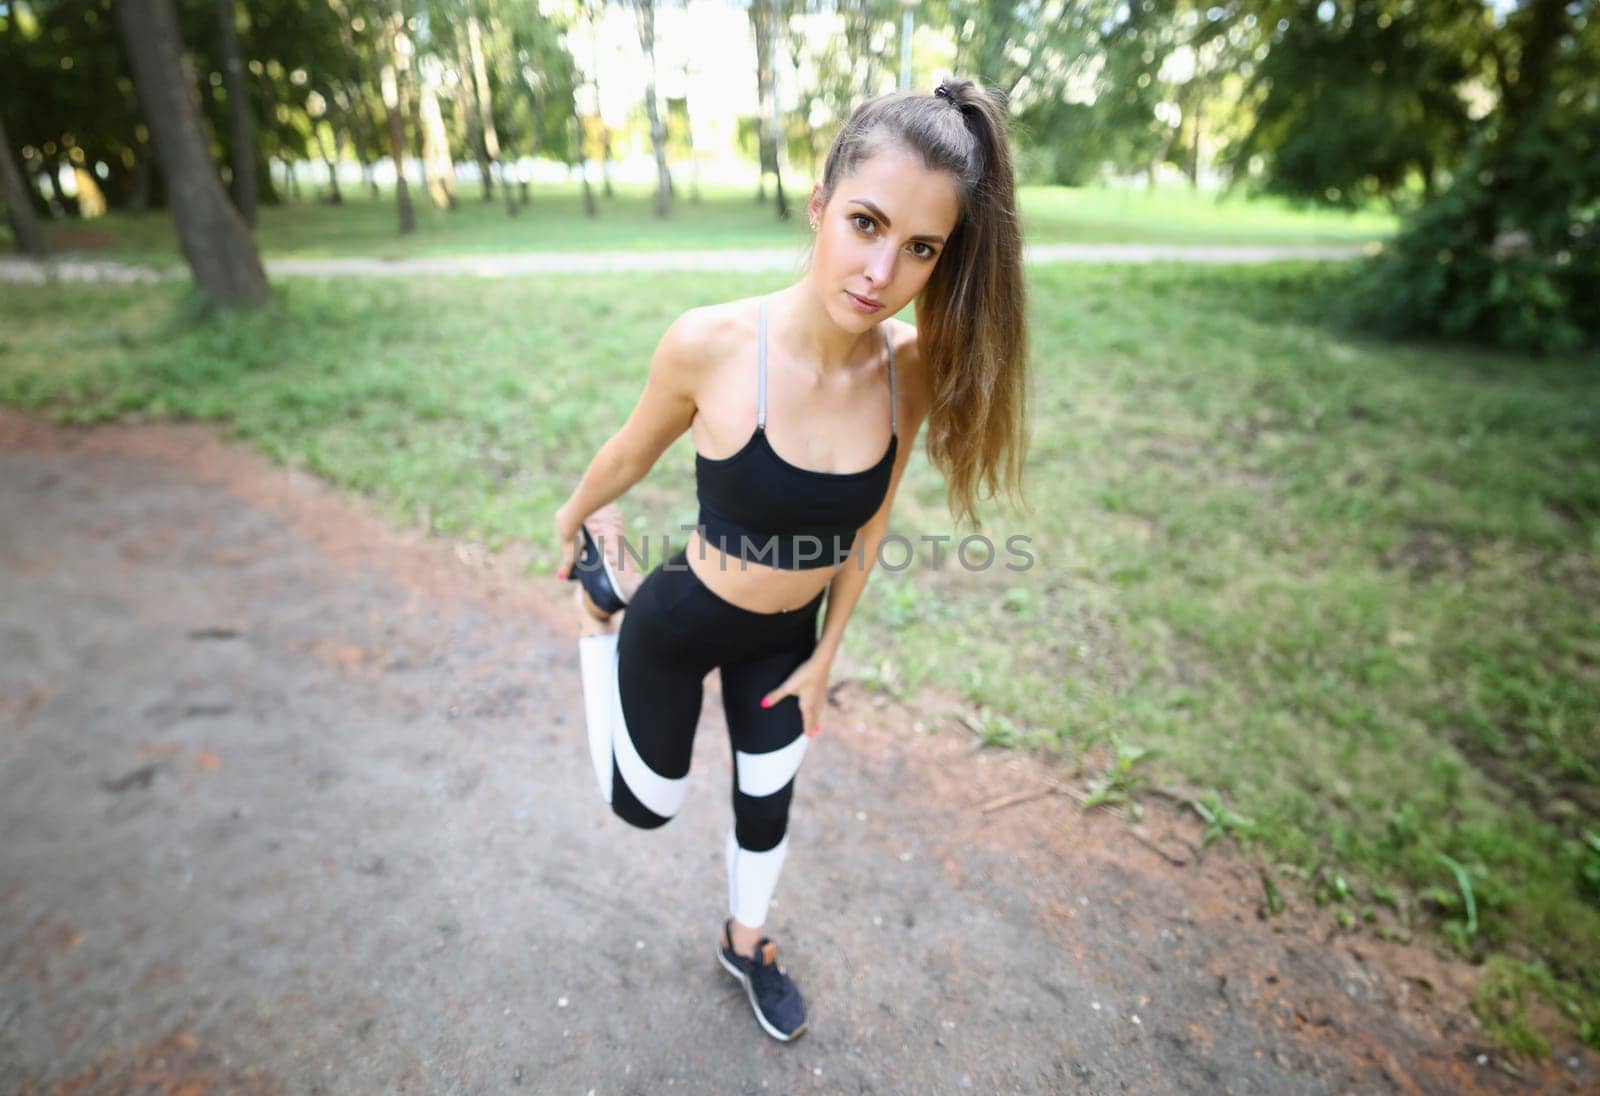 Girl in sportswear stretches leg muscles in park. After morning exercises, feeling lightness and vitality appears. Arms and legs bend slightly in joints without tension and turn them at moderate pace.